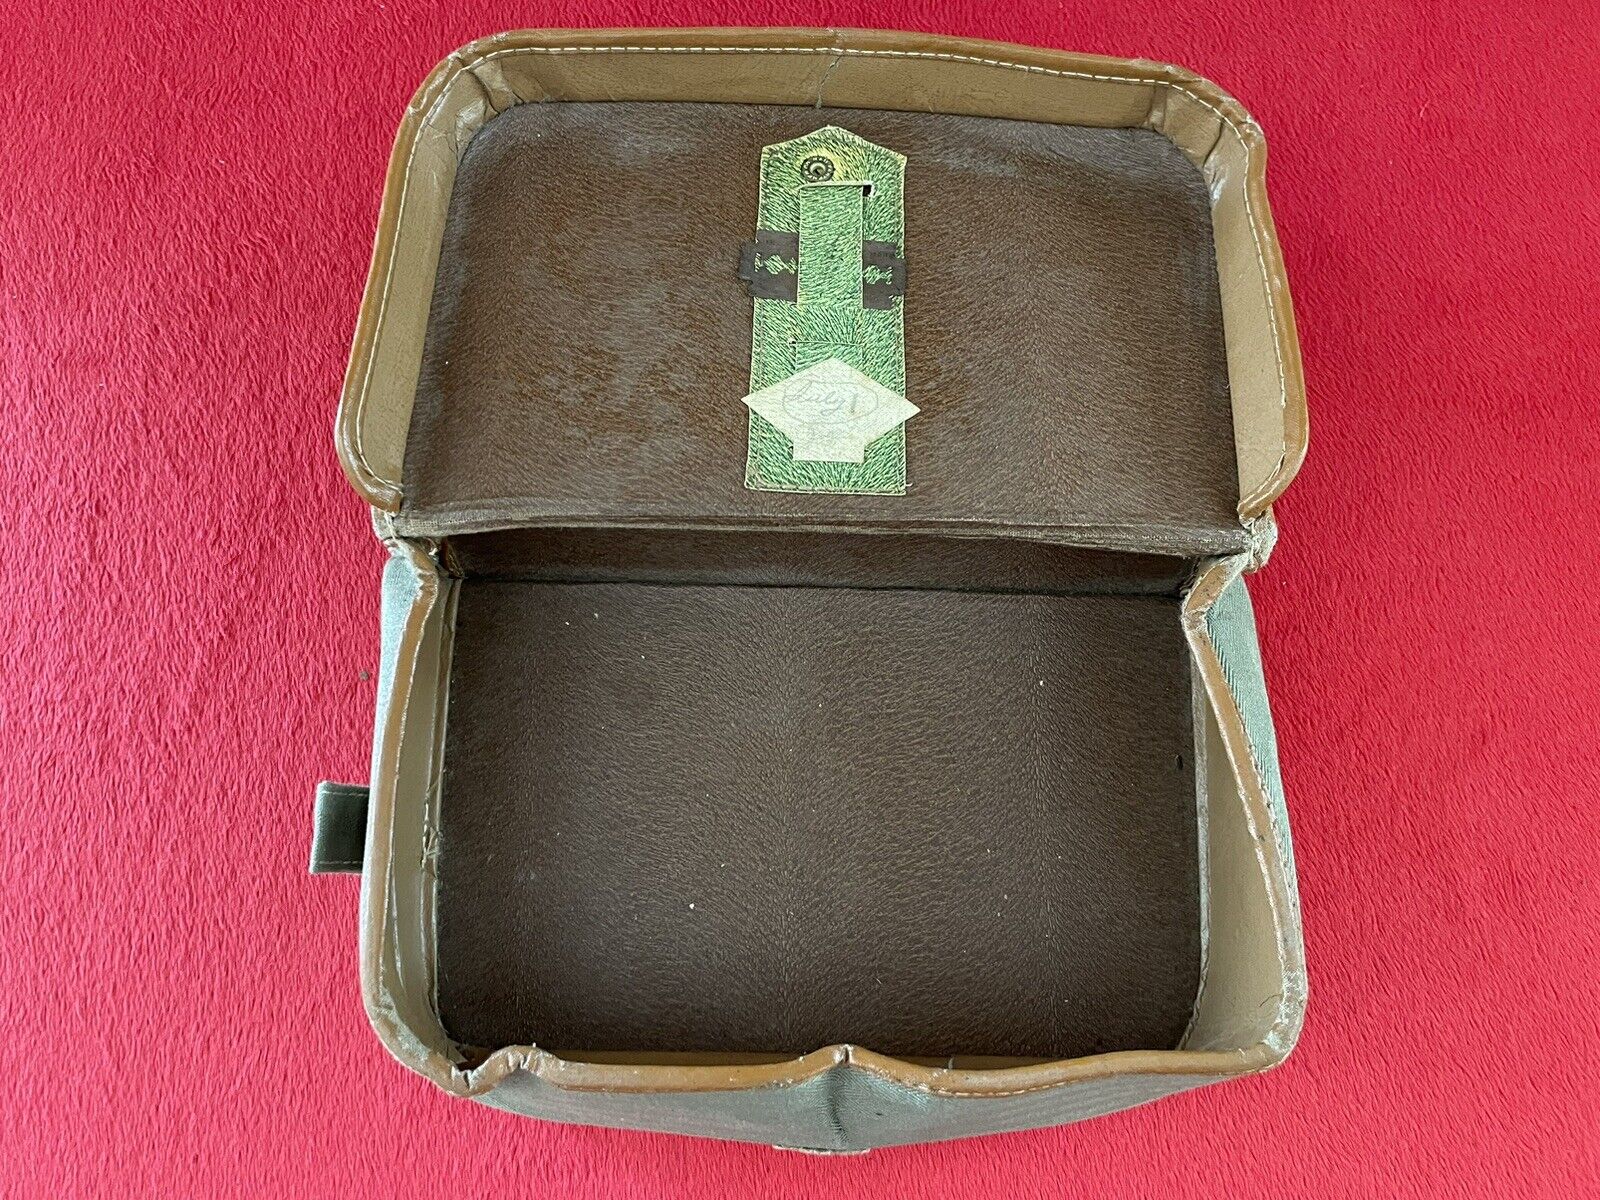 Original WWII U.S. Private Purchase Toiletry Shaving Grooming Kit Case WW2